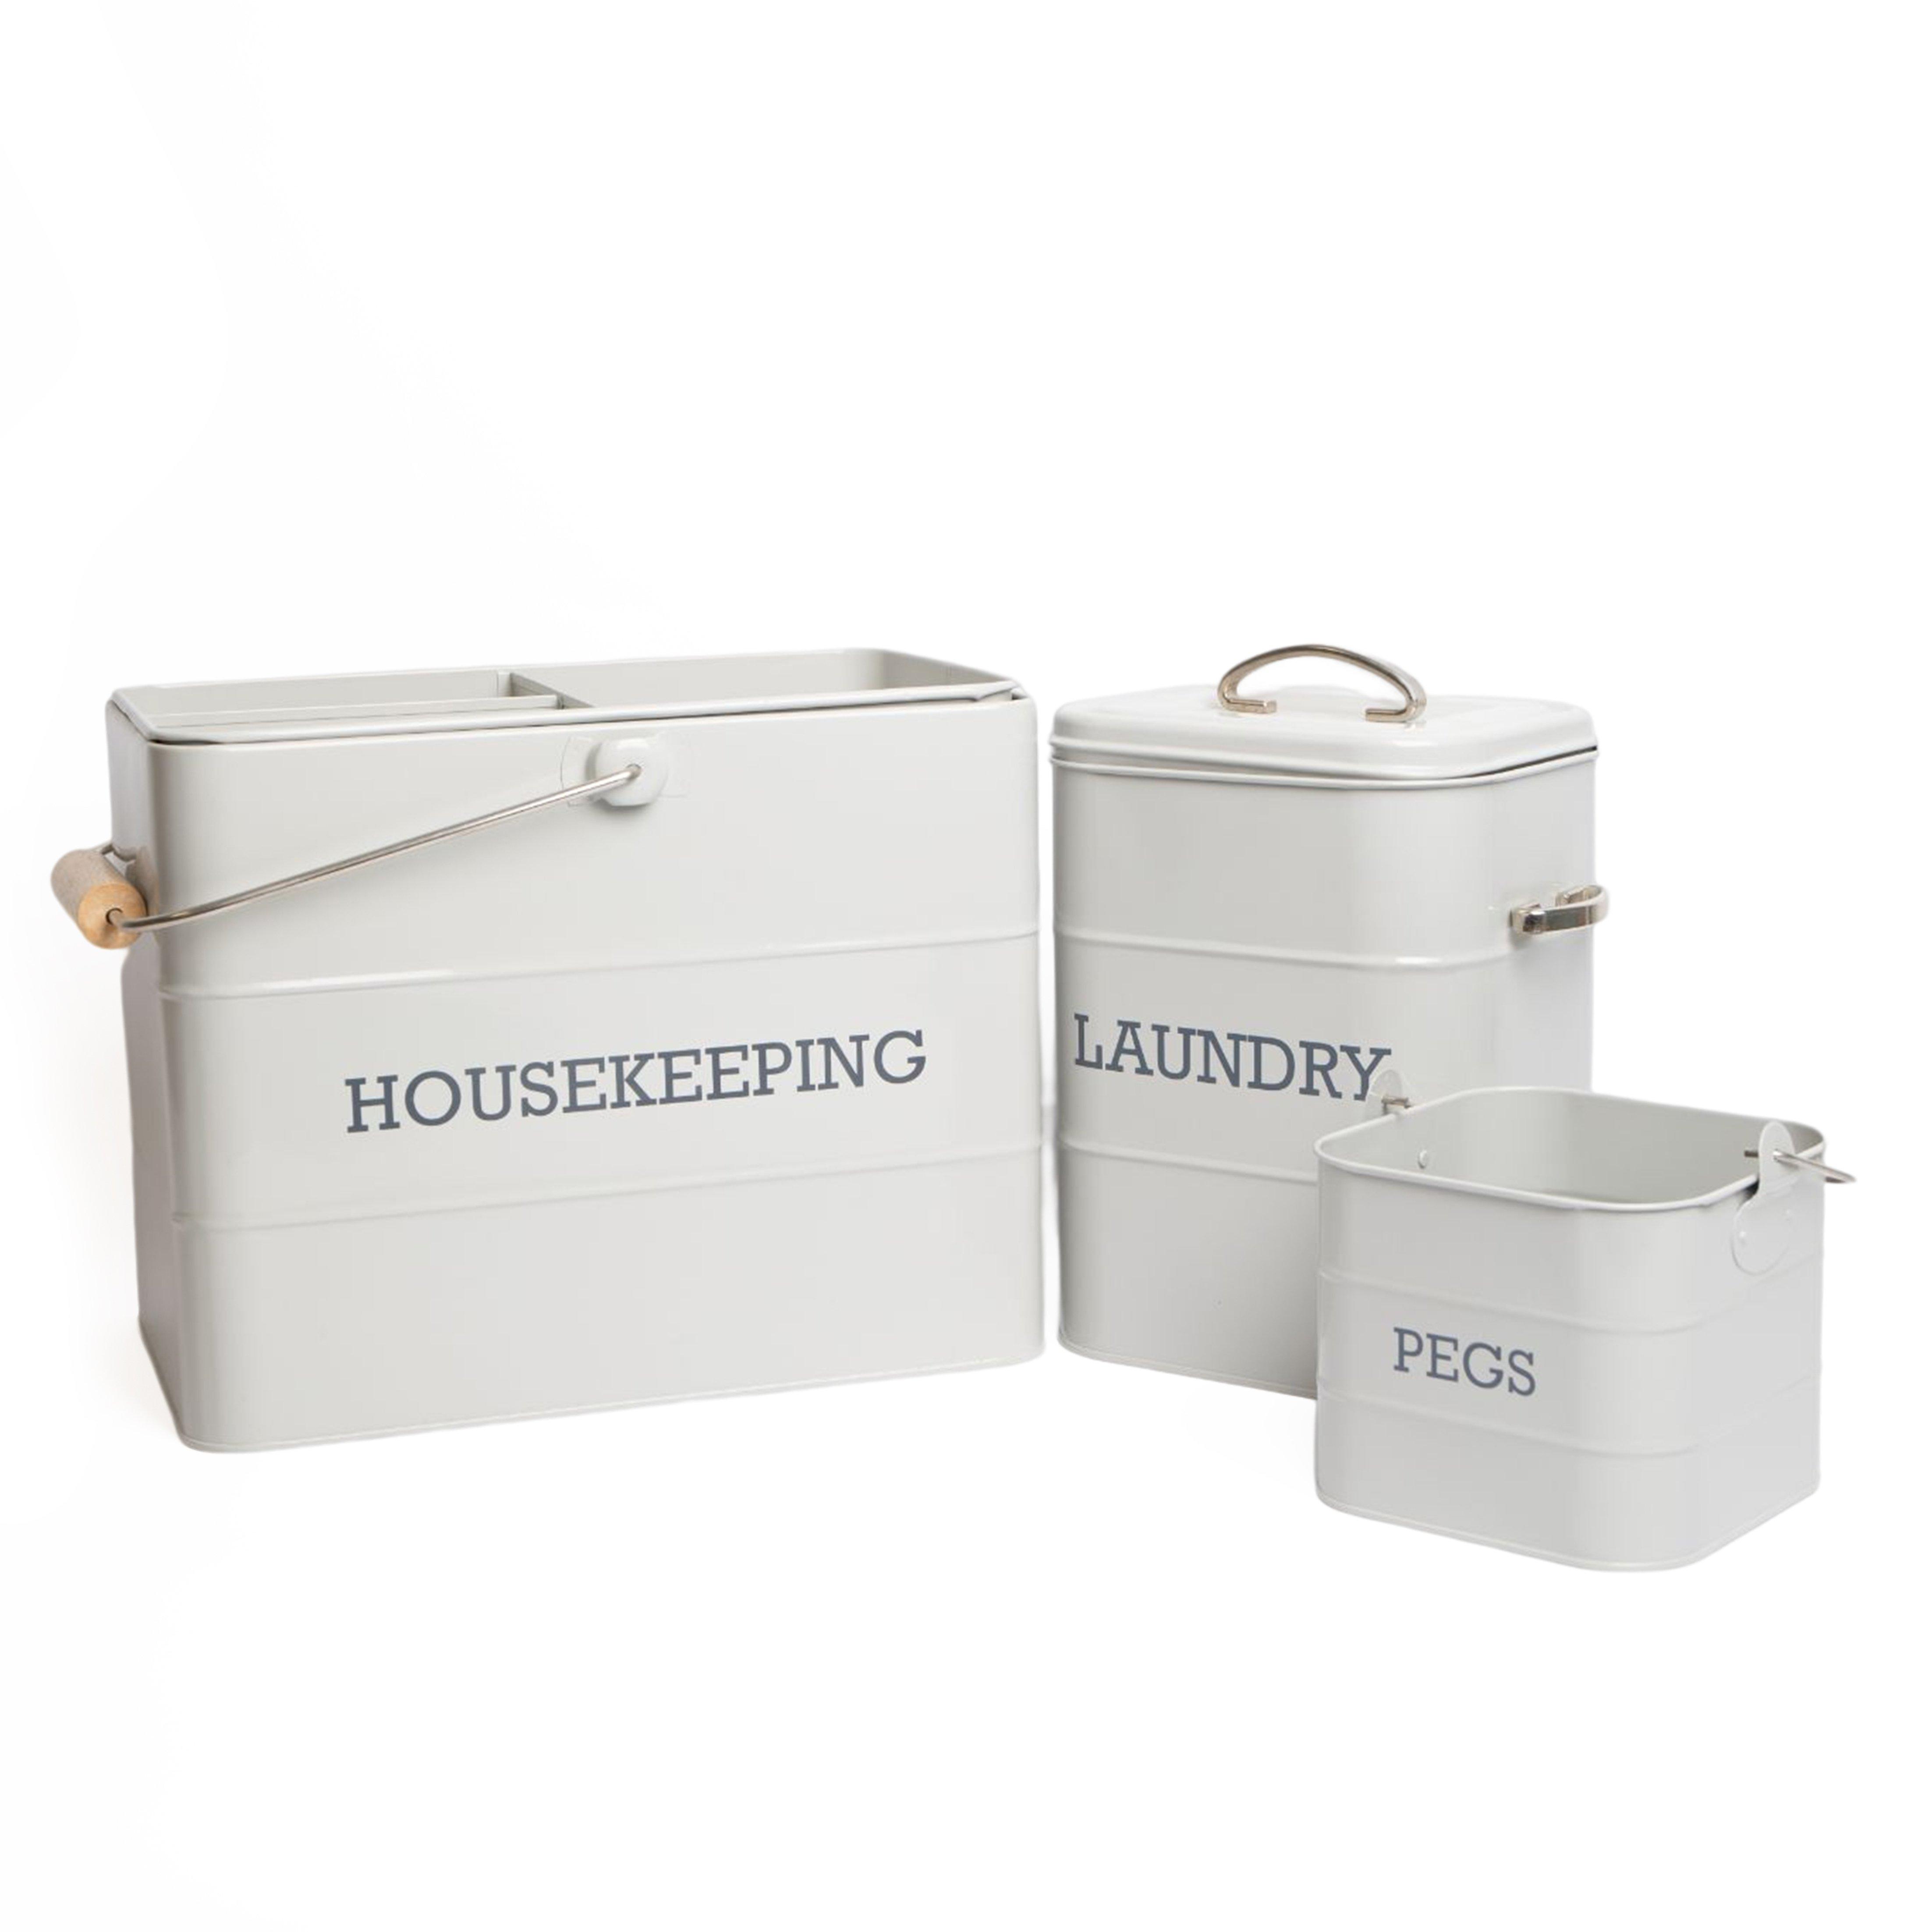 3pc French Grey Housekeeping Storage Set with Stainless Steel Housekeeping Tin, Laundry Tin and Peg 